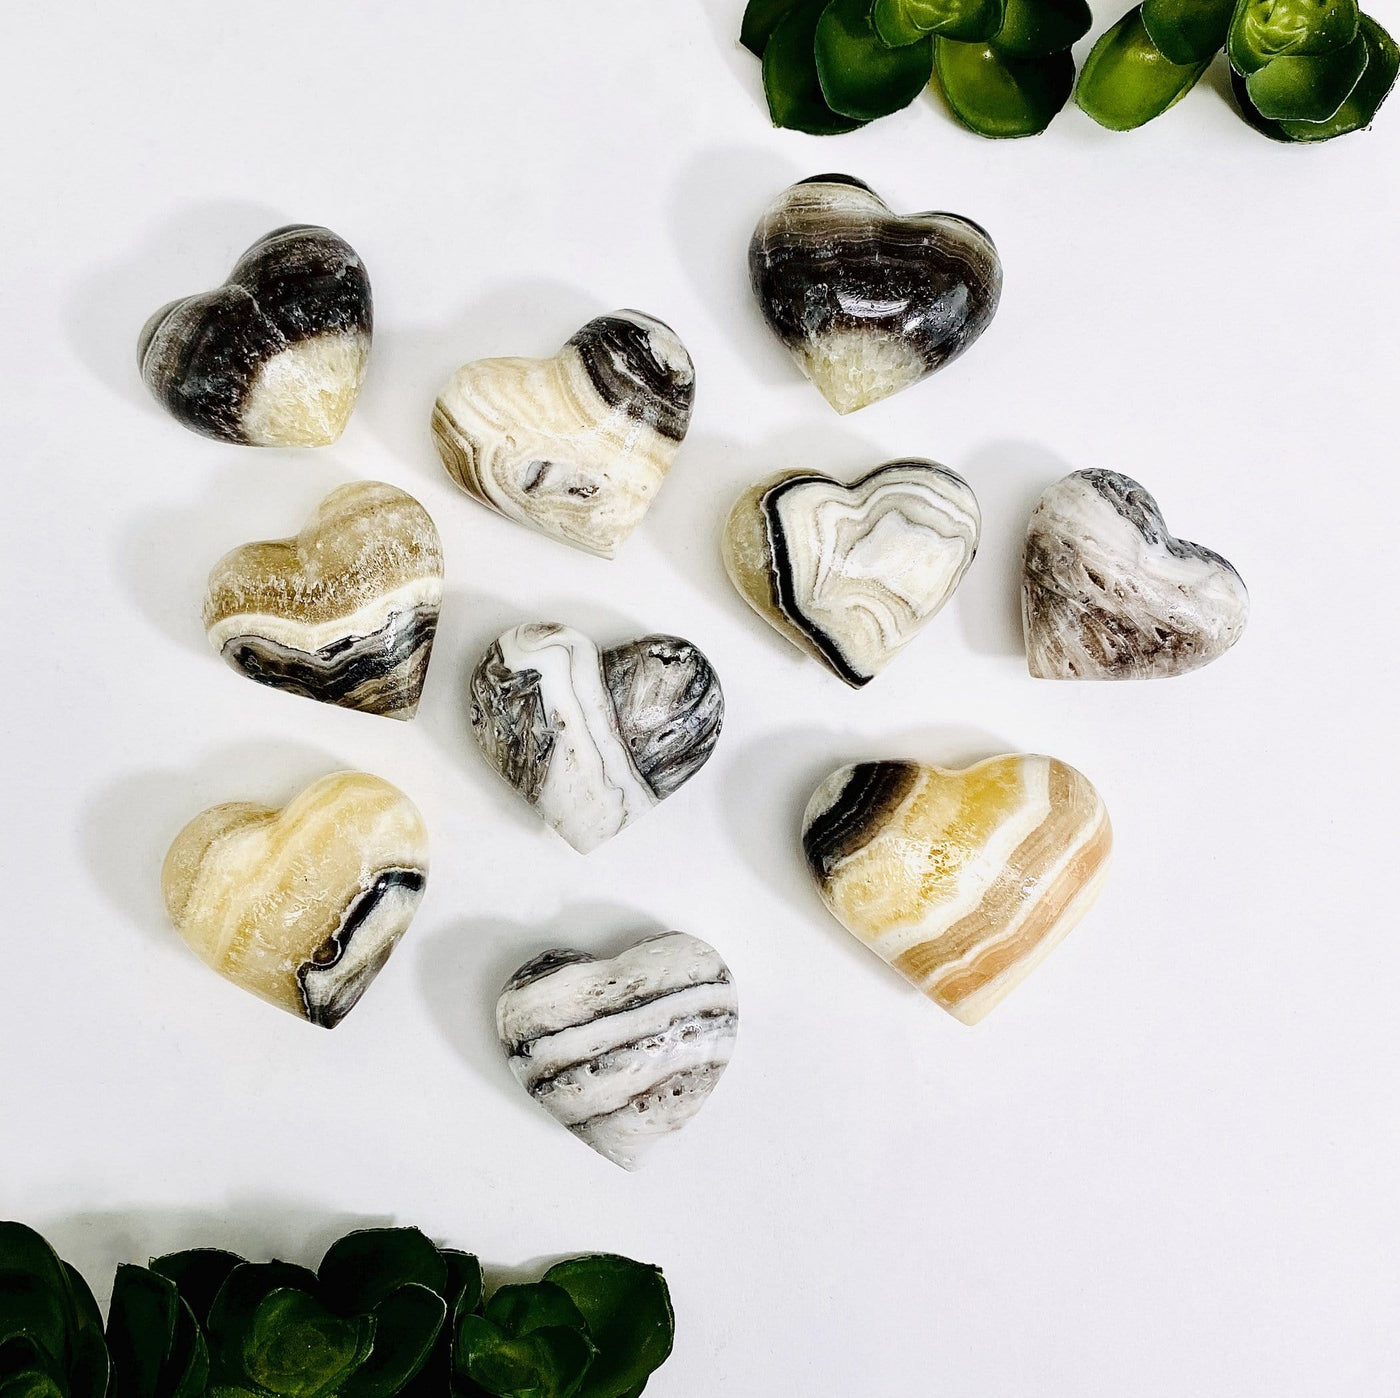 10 Zebra Onyx Puff Hearts showing different markings and colors